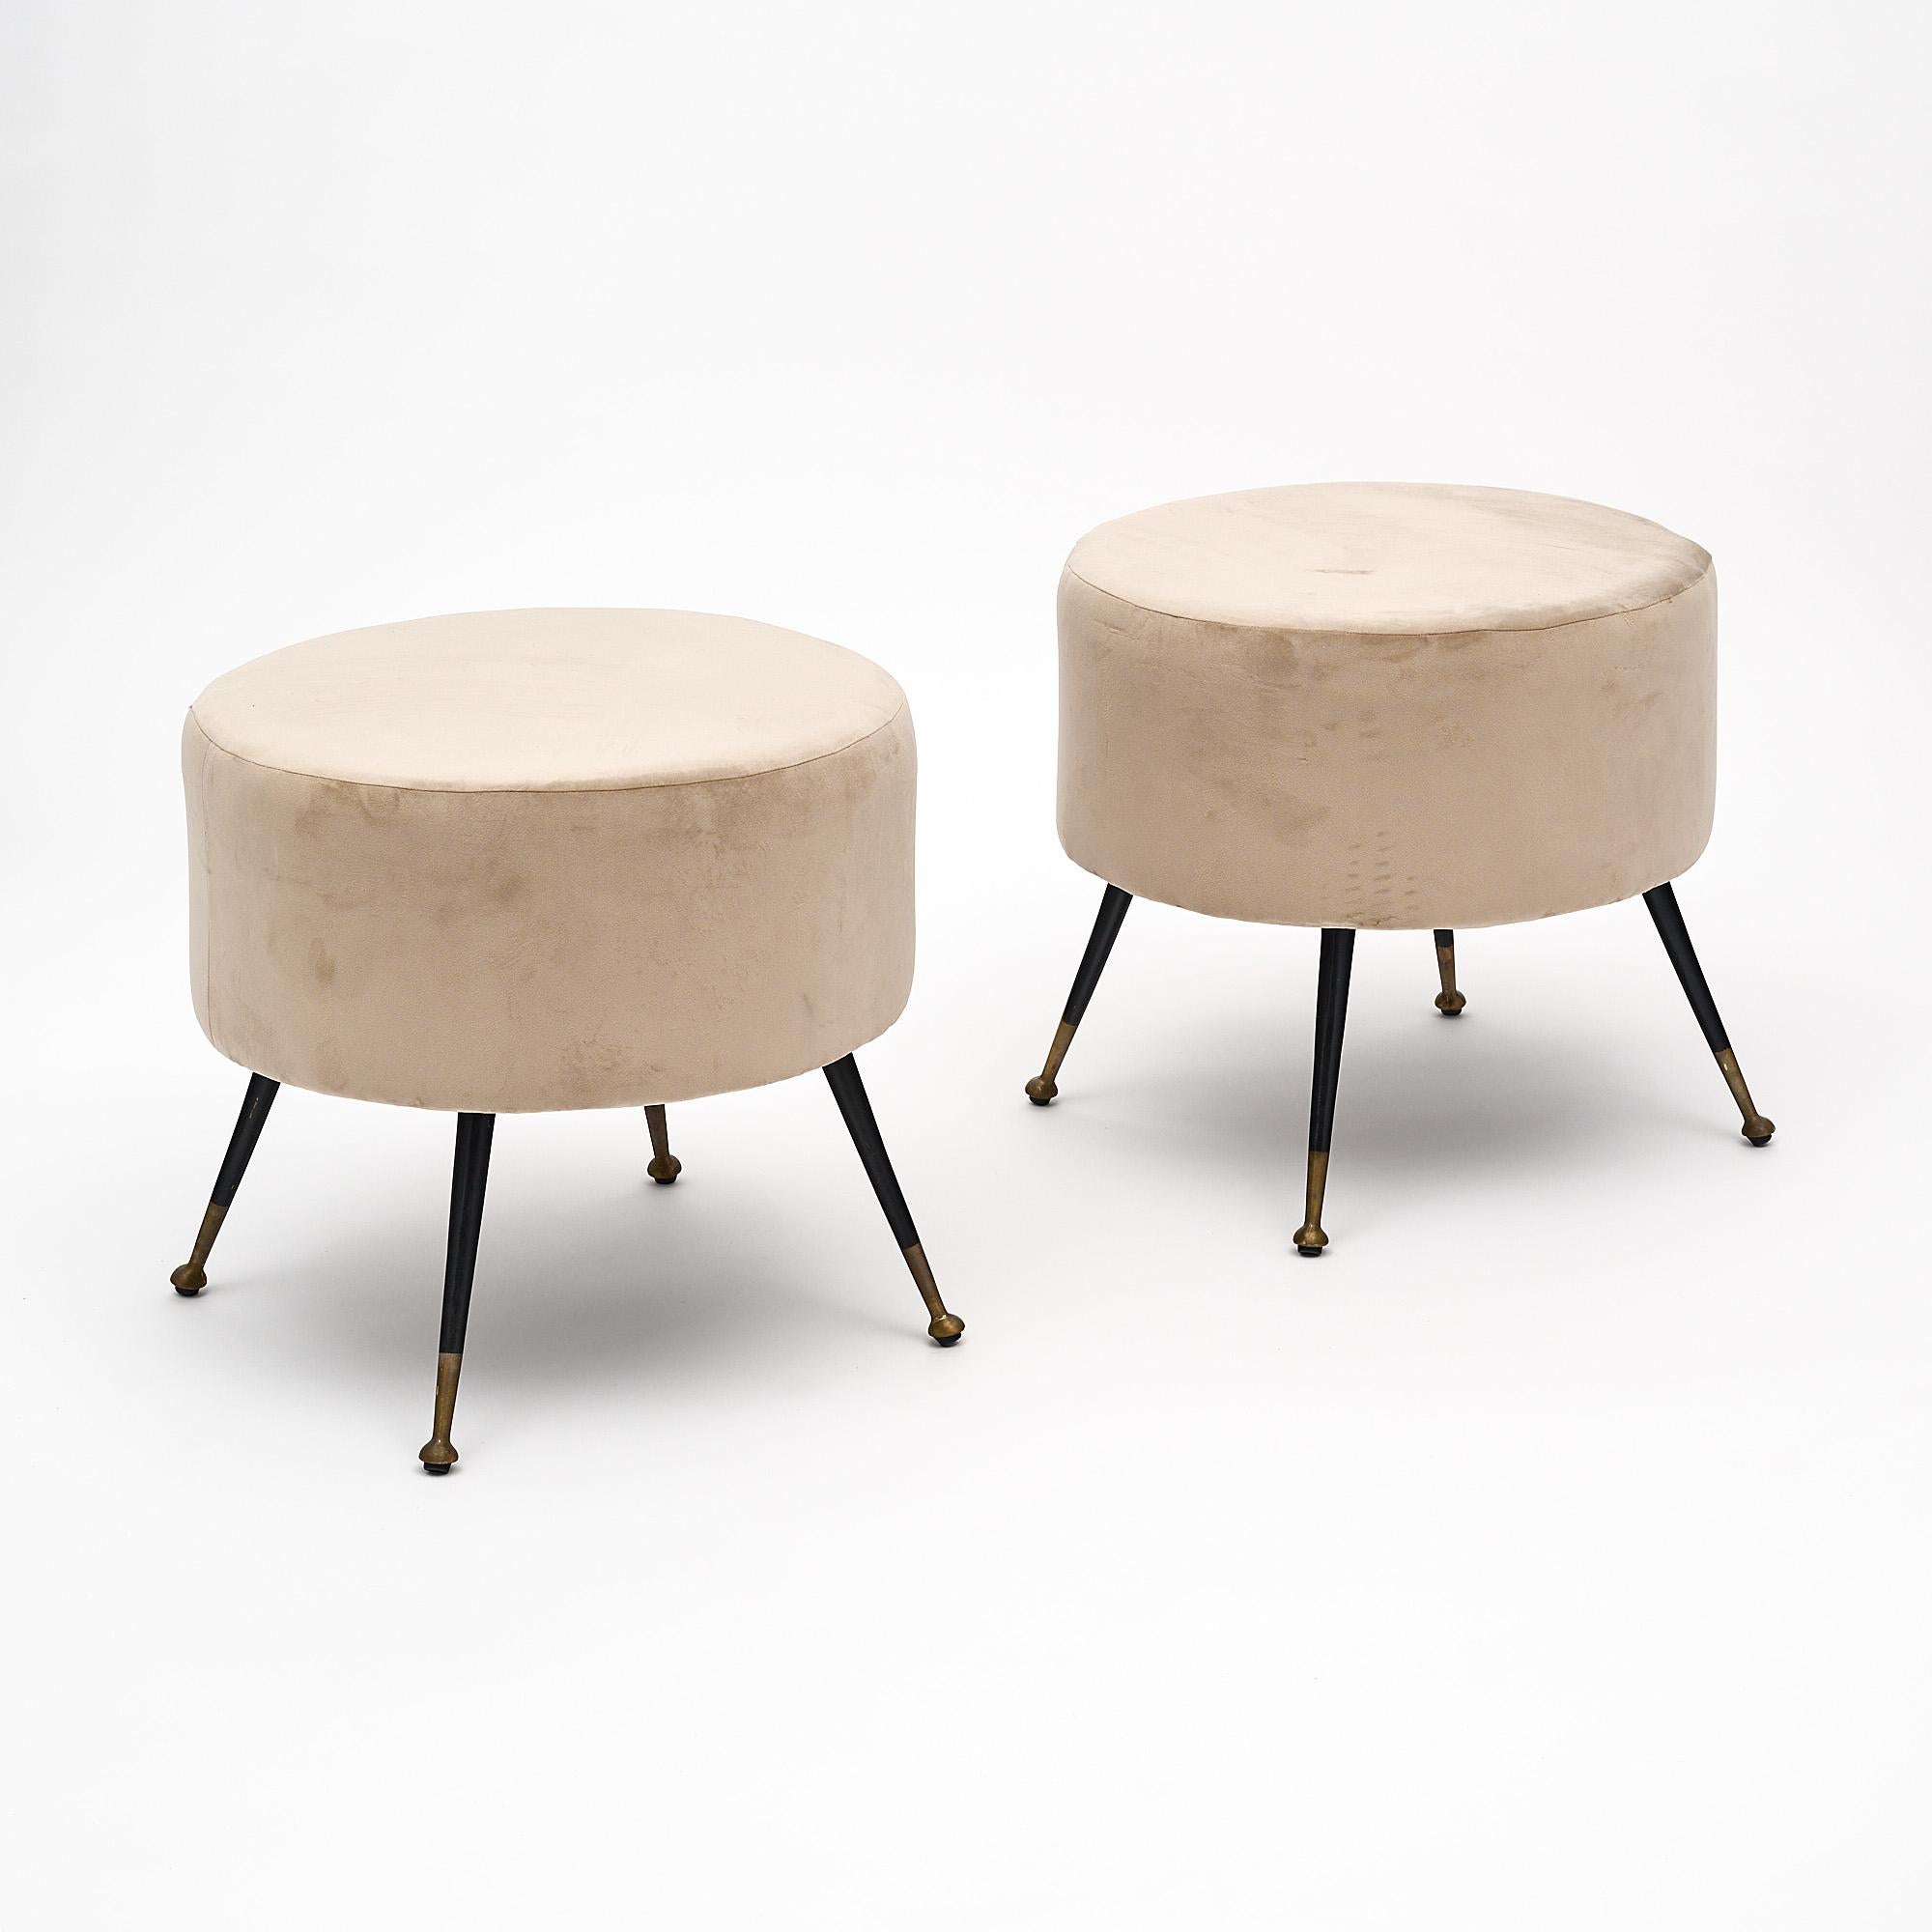 Pair of Italian mid- century Modern stools newly upholstered with an taupe colored micro fiber. Four original tapered black lacquered steel legs with brass feet.